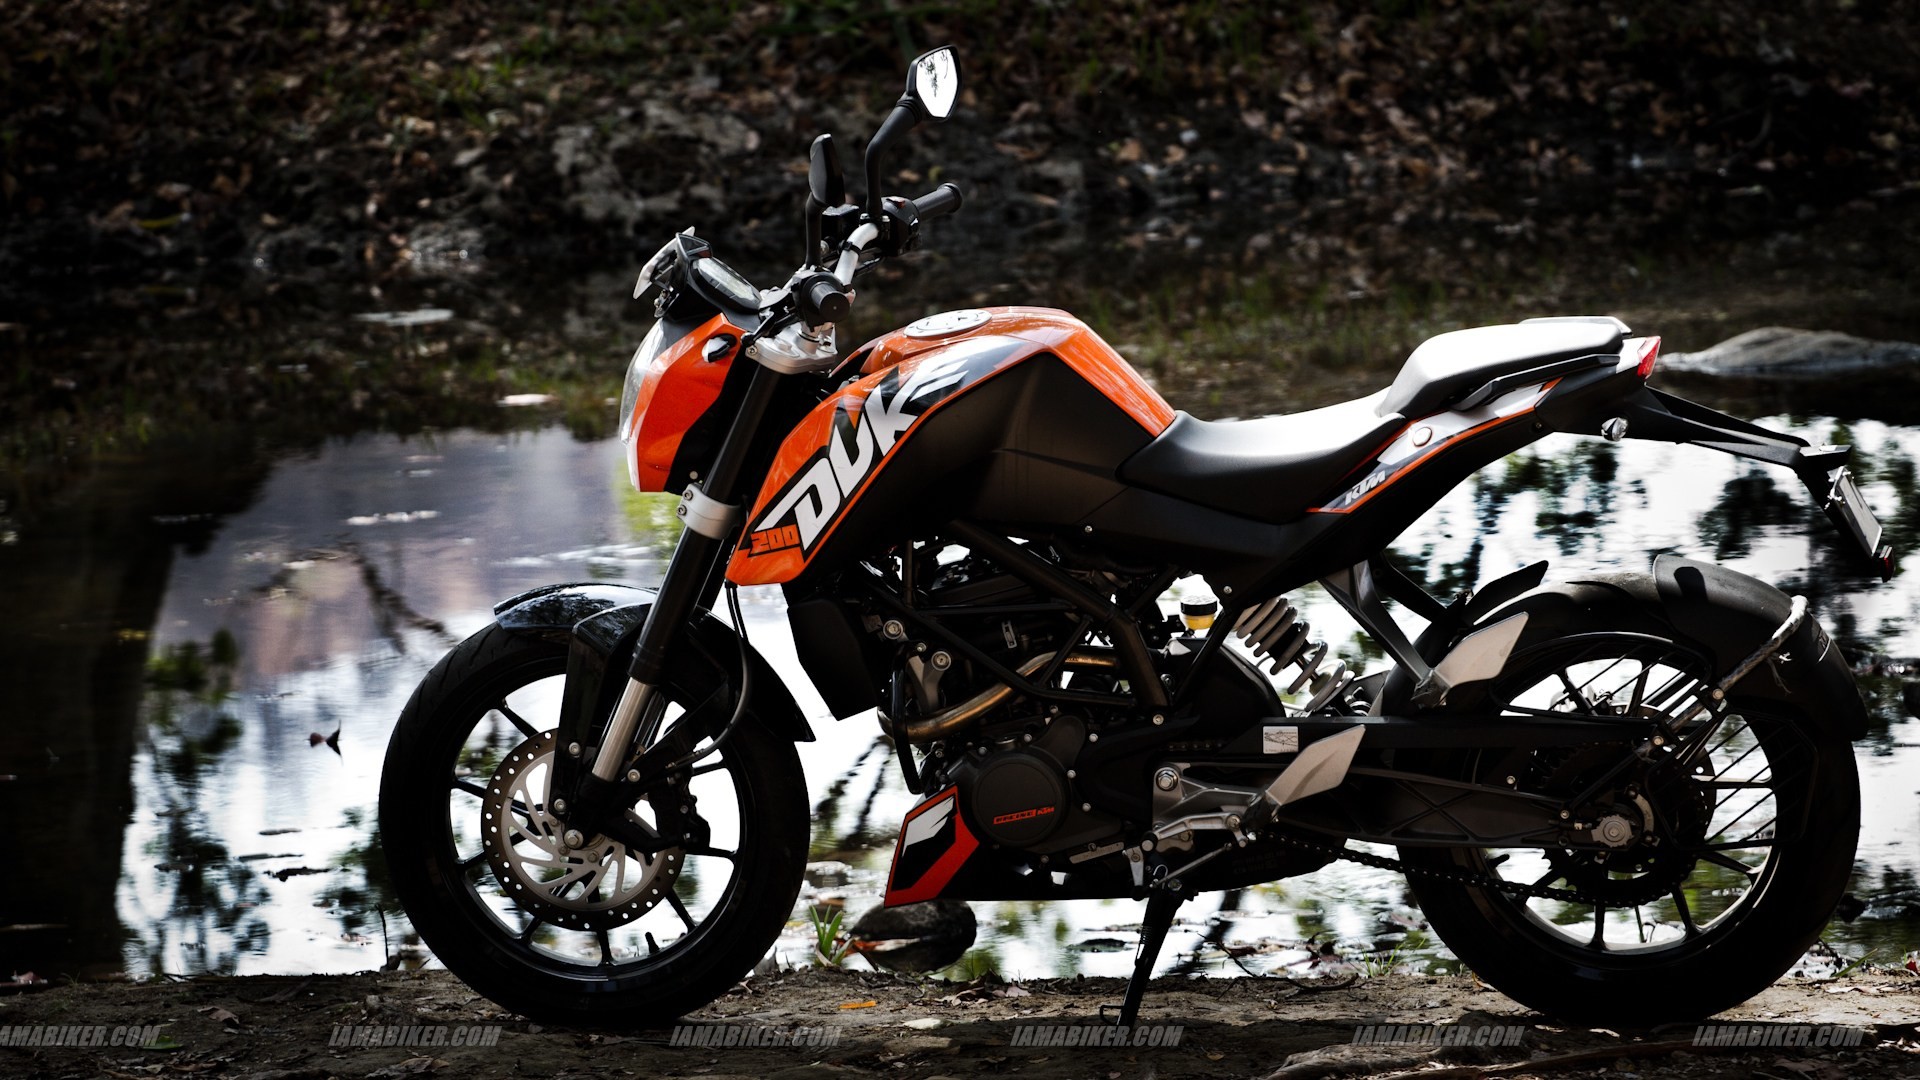 1920x1080 KTM Duke 200 HD wallpaper gallery. Click on picture to see high .